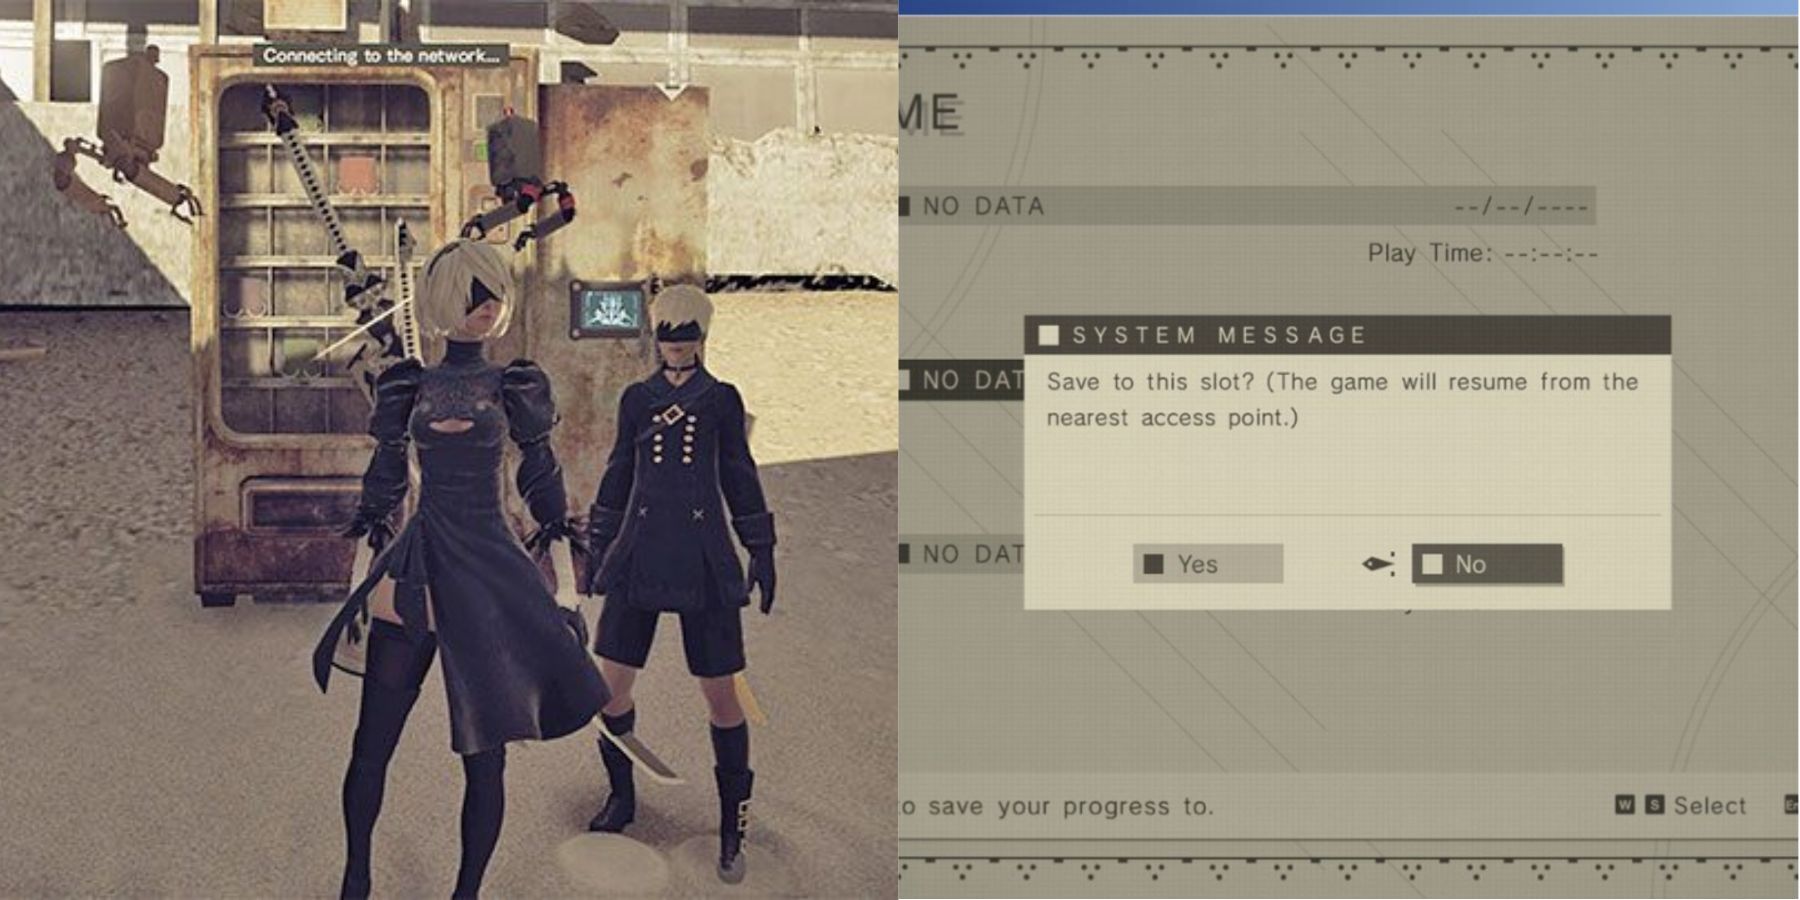 How to Save in Nier Automata 